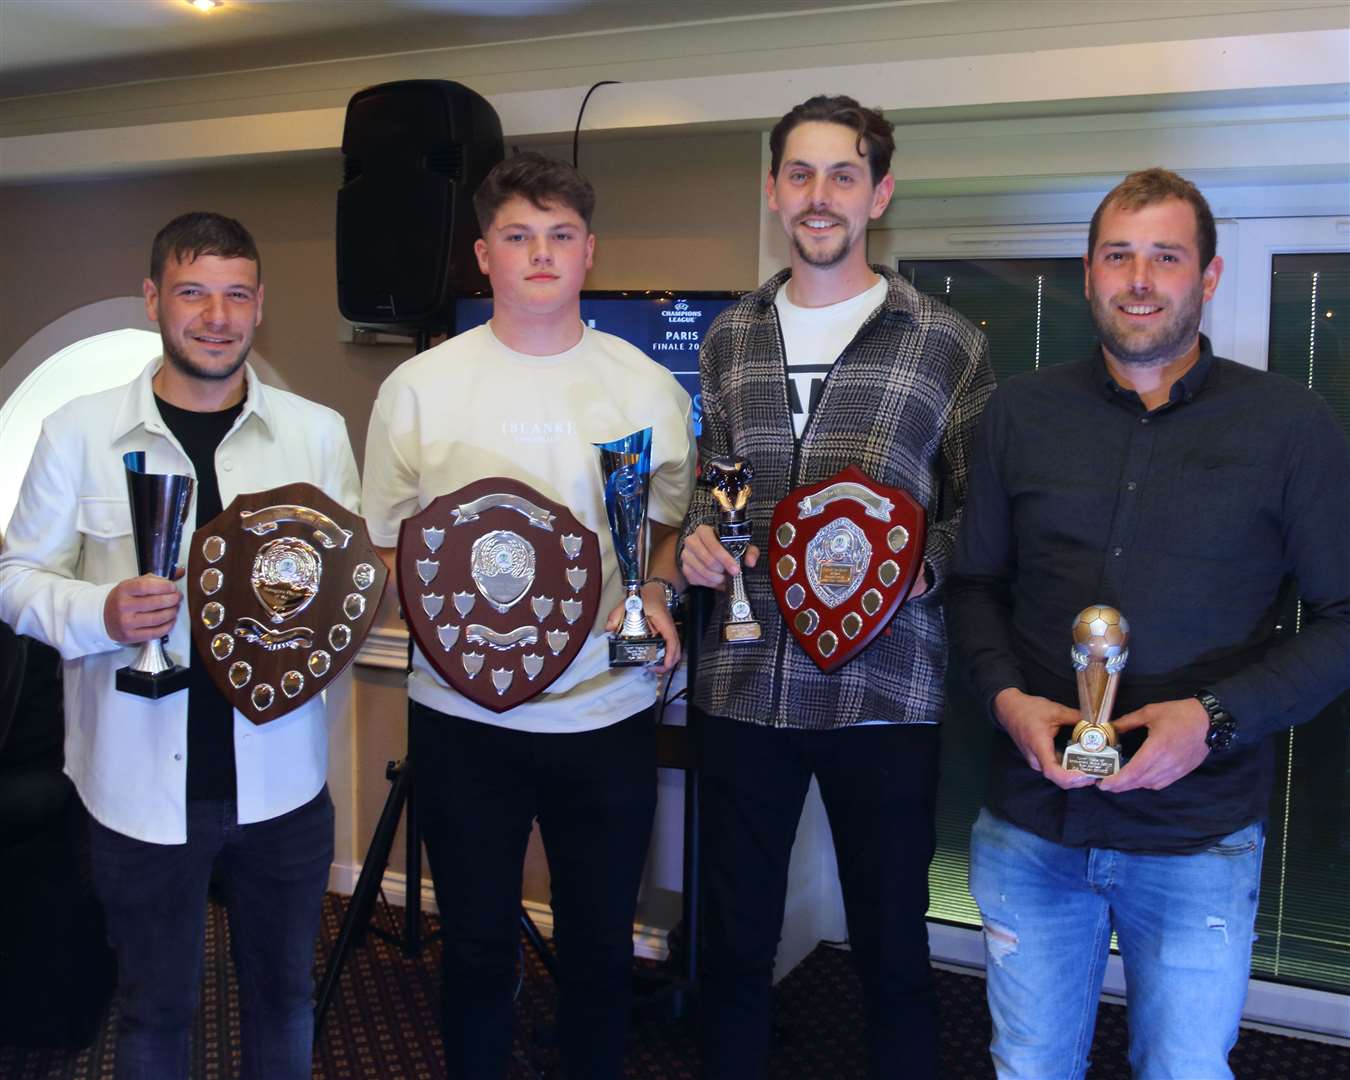 Turriff Thistle's award winners were presented at an event held on Saturday.